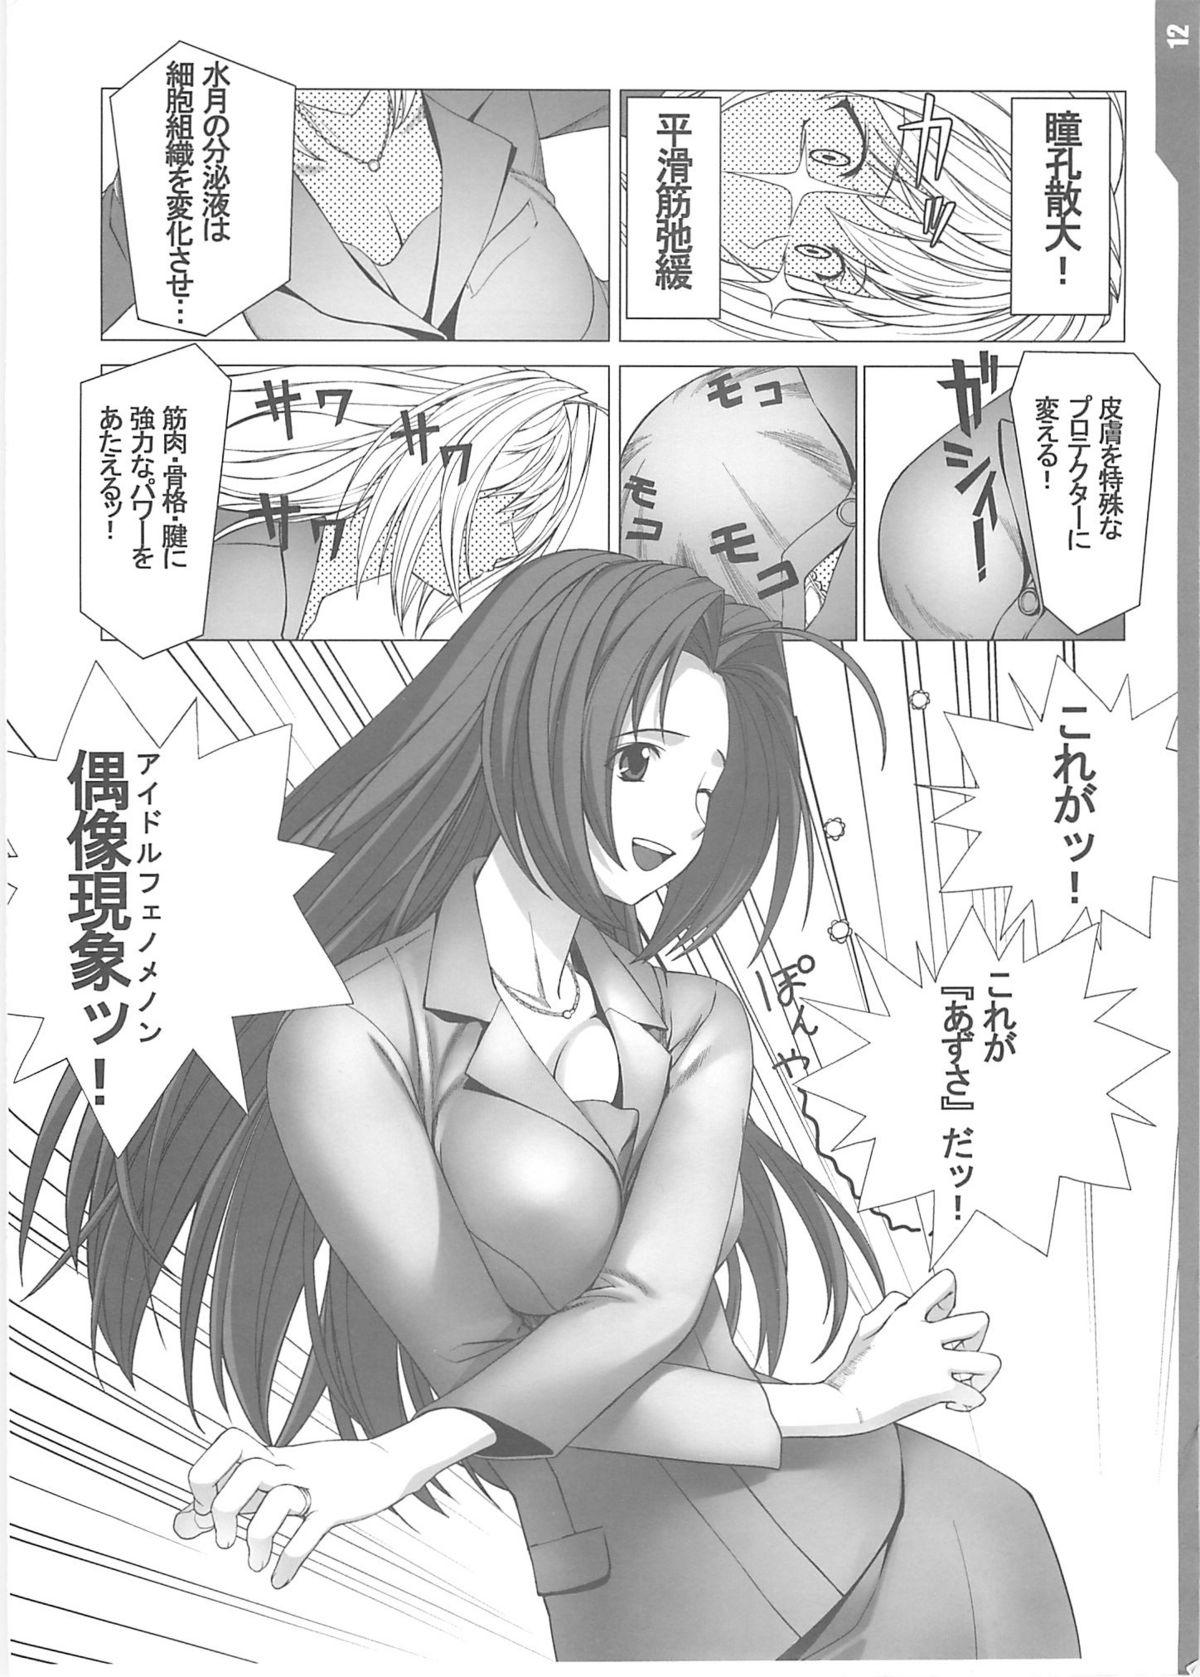 Animation Enikki Recycle 7 no Omake Hon - Beat Angel - The idolmaster Dando - Page 12